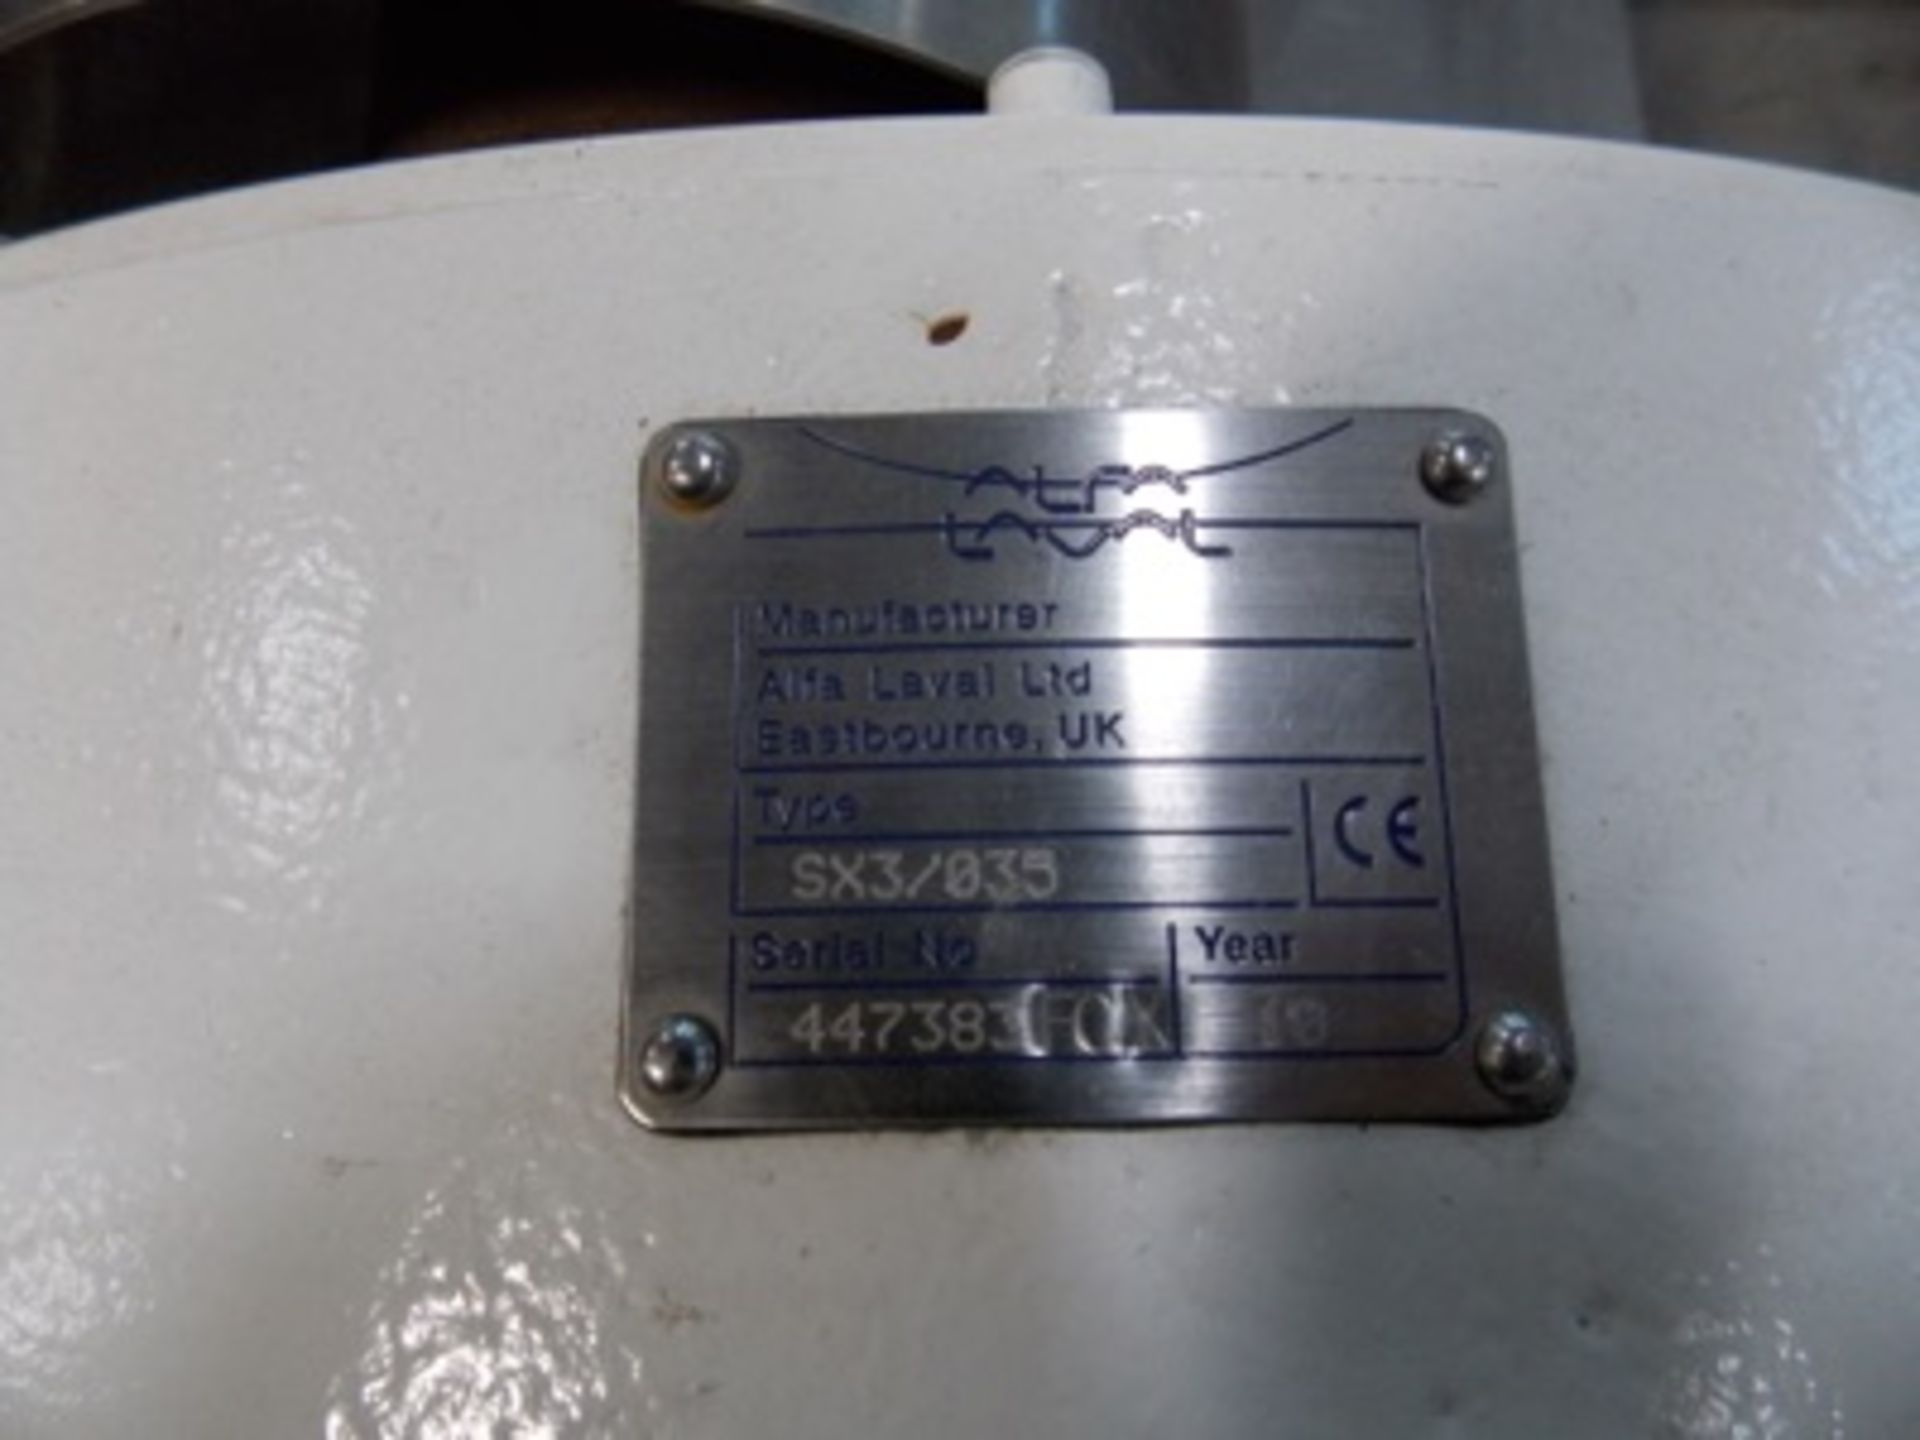 Type SX3/035 Positive Displacement Pump, 2.5" In 2.5" Out, S/N 447383 (Unused) - Image 3 of 3